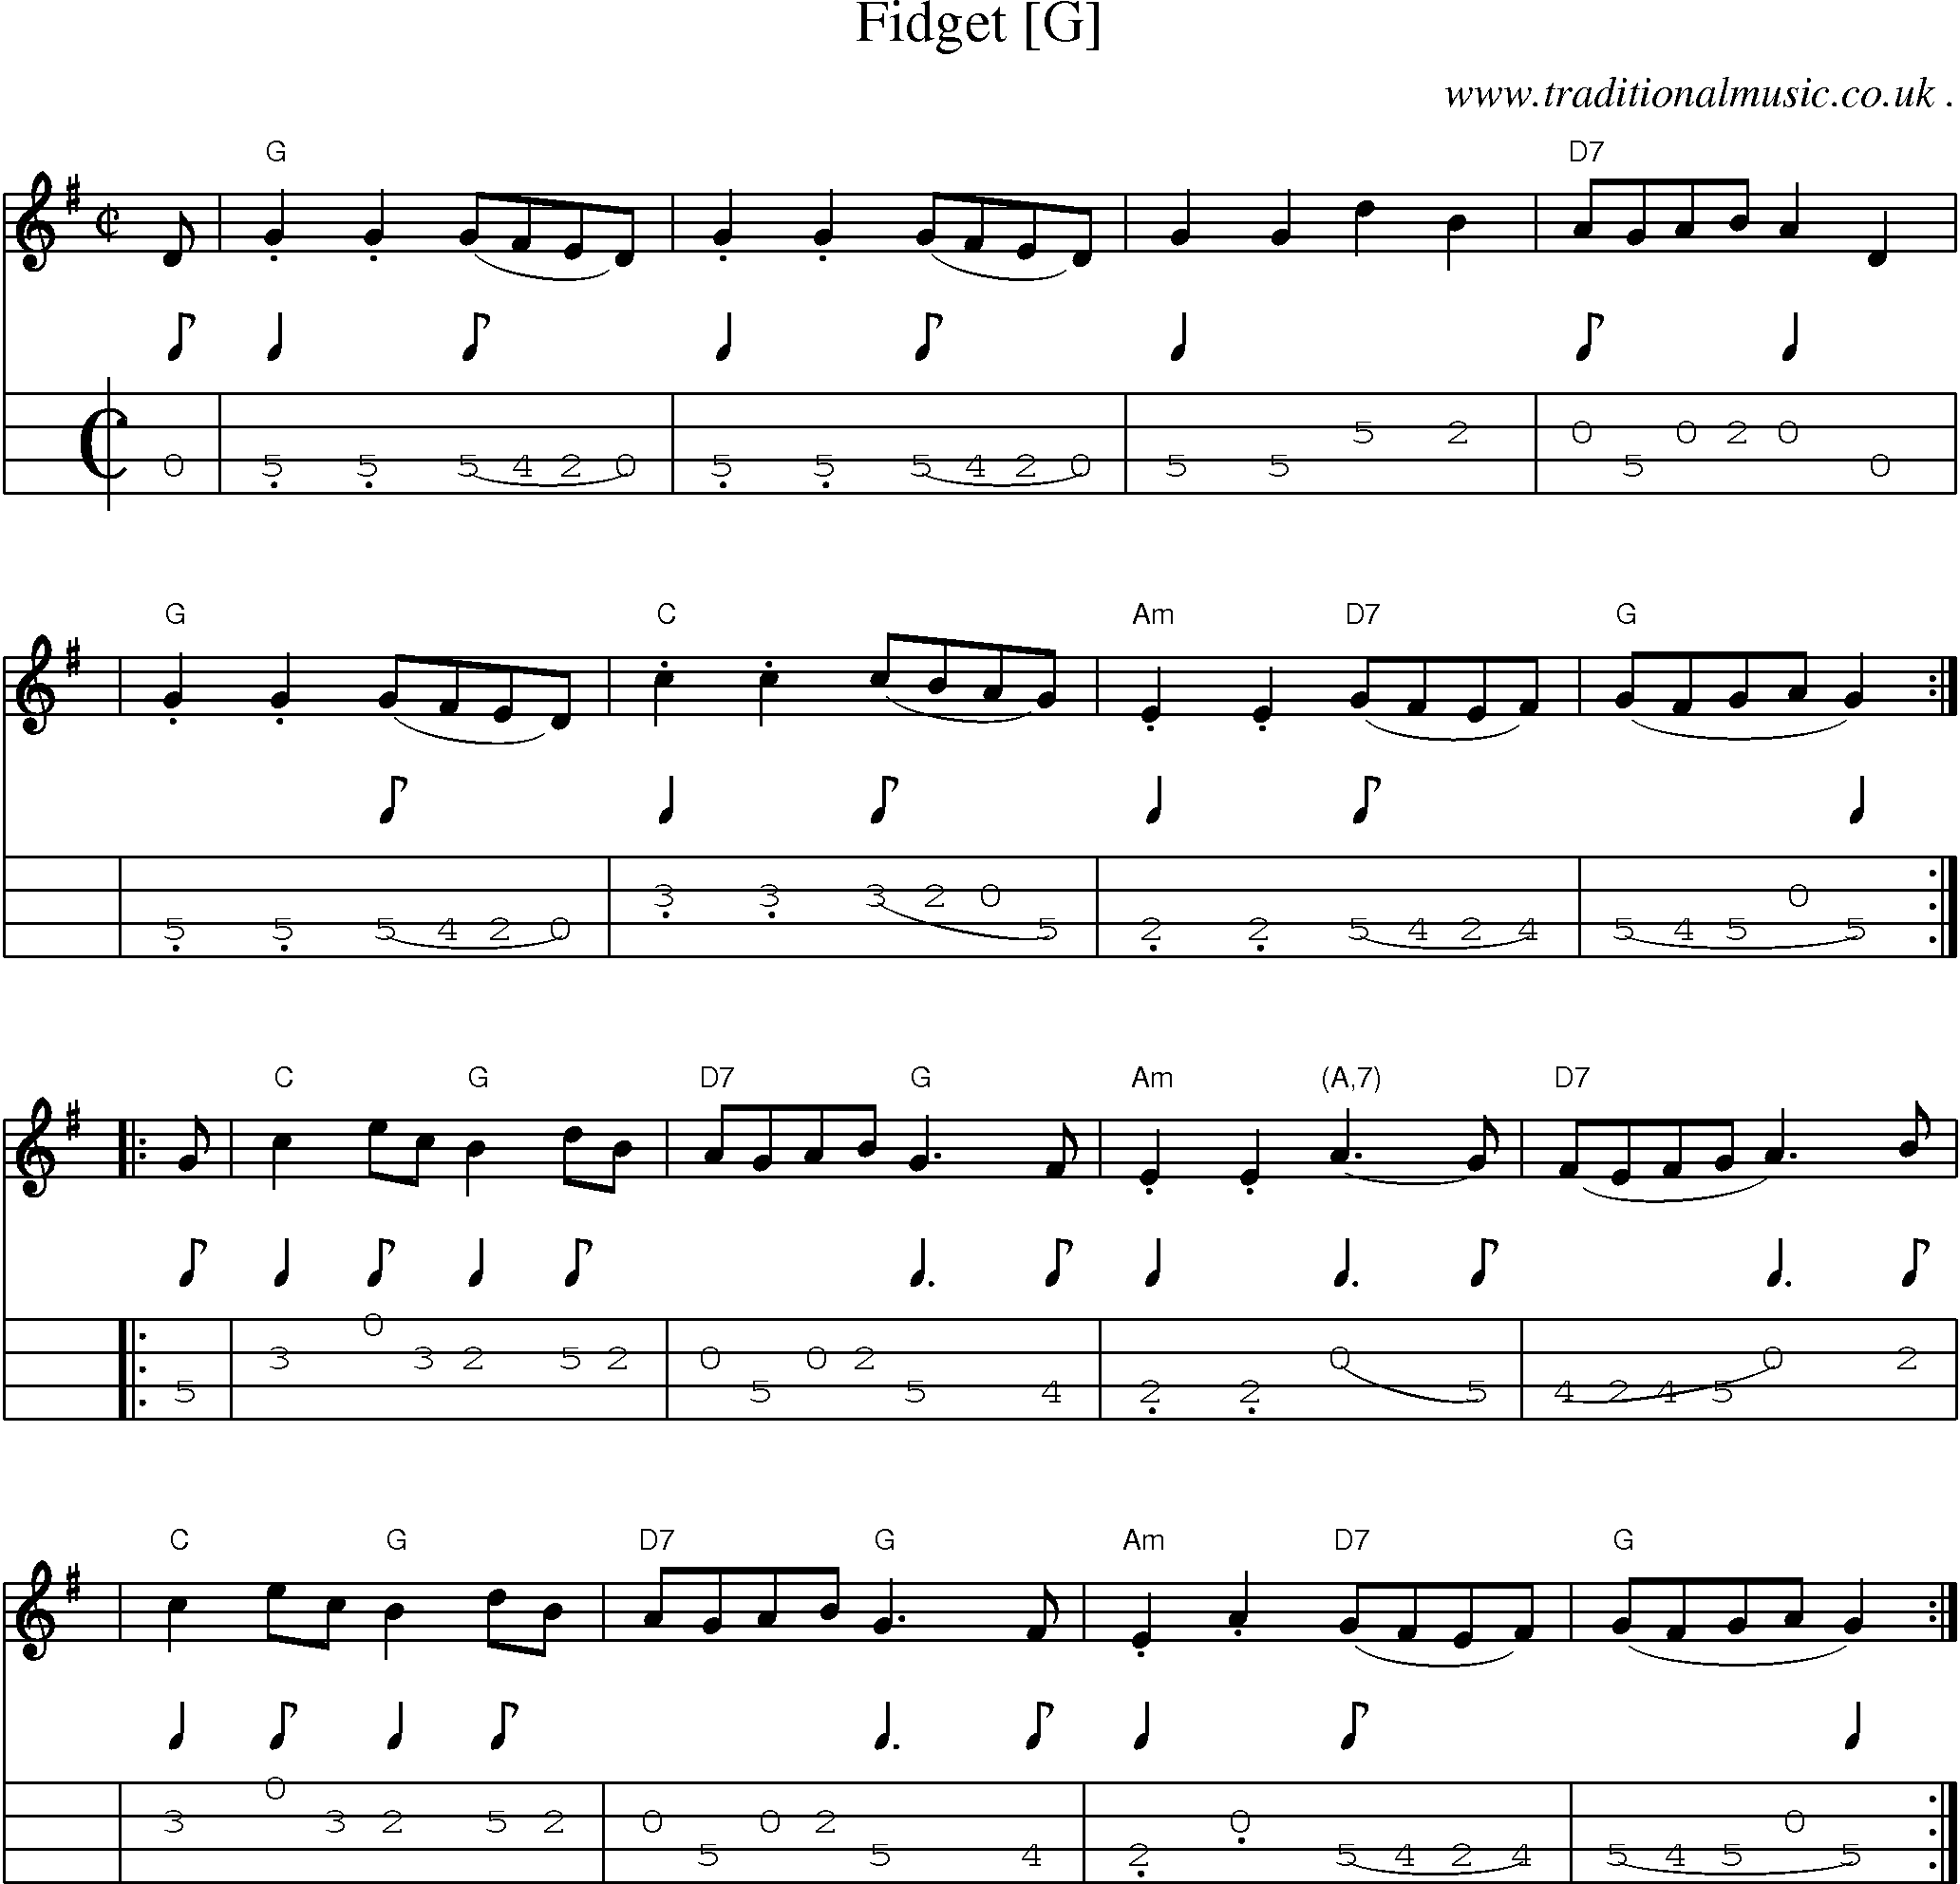 Sheet-music  score, Chords and Mandolin Tabs for Fidget [g]